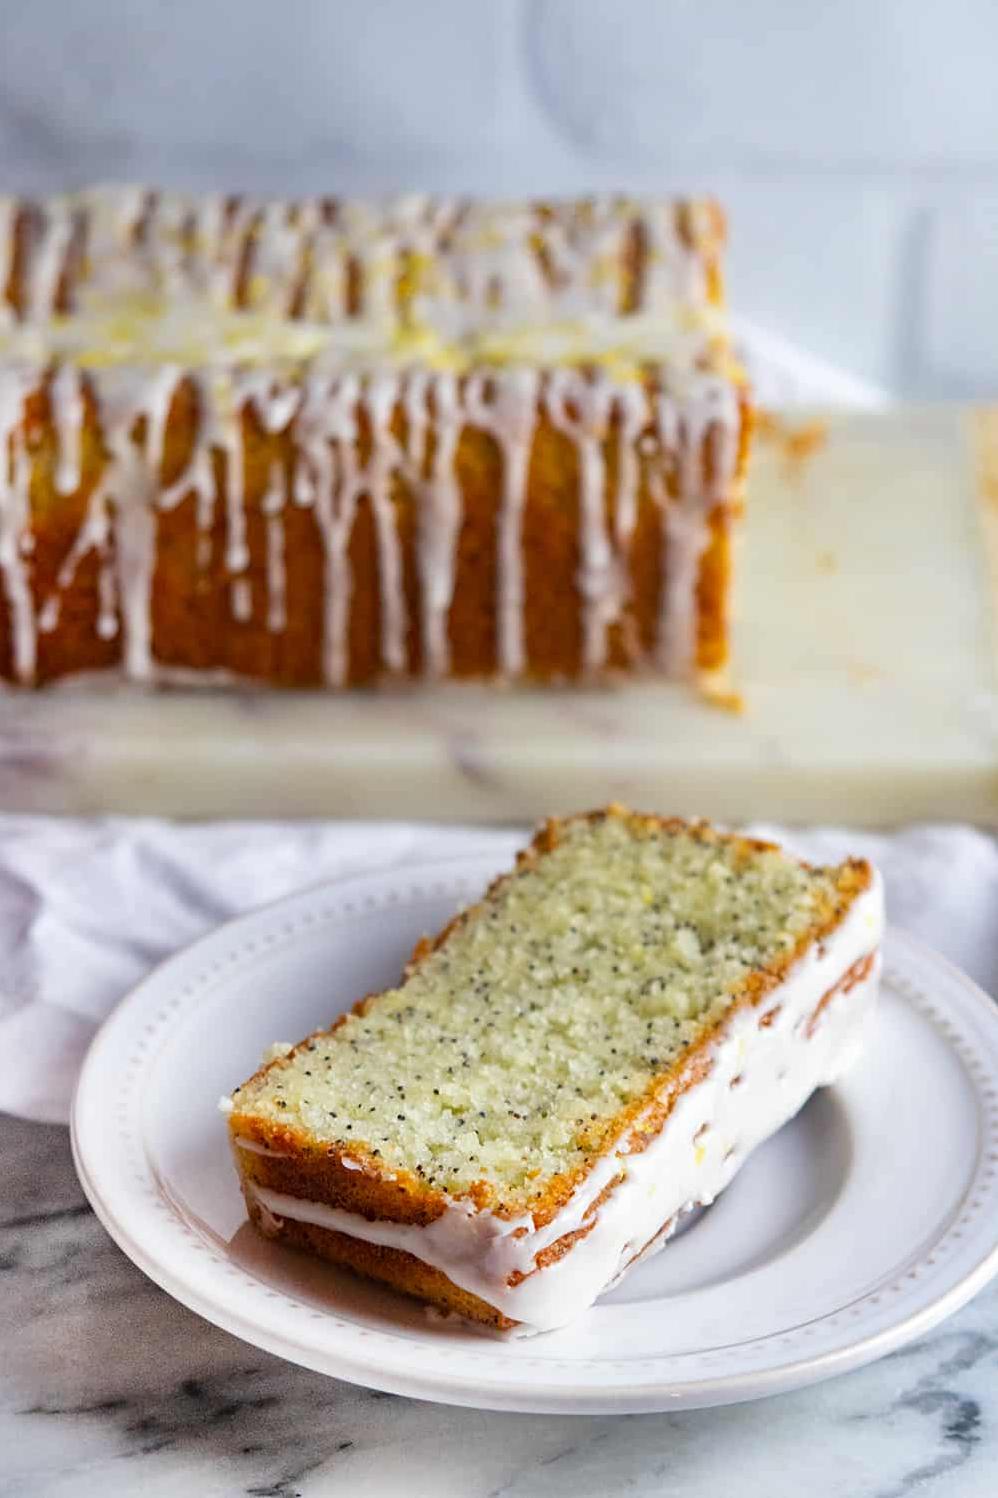  Every bite of this cake feels like a burst of sunshine in your mouth